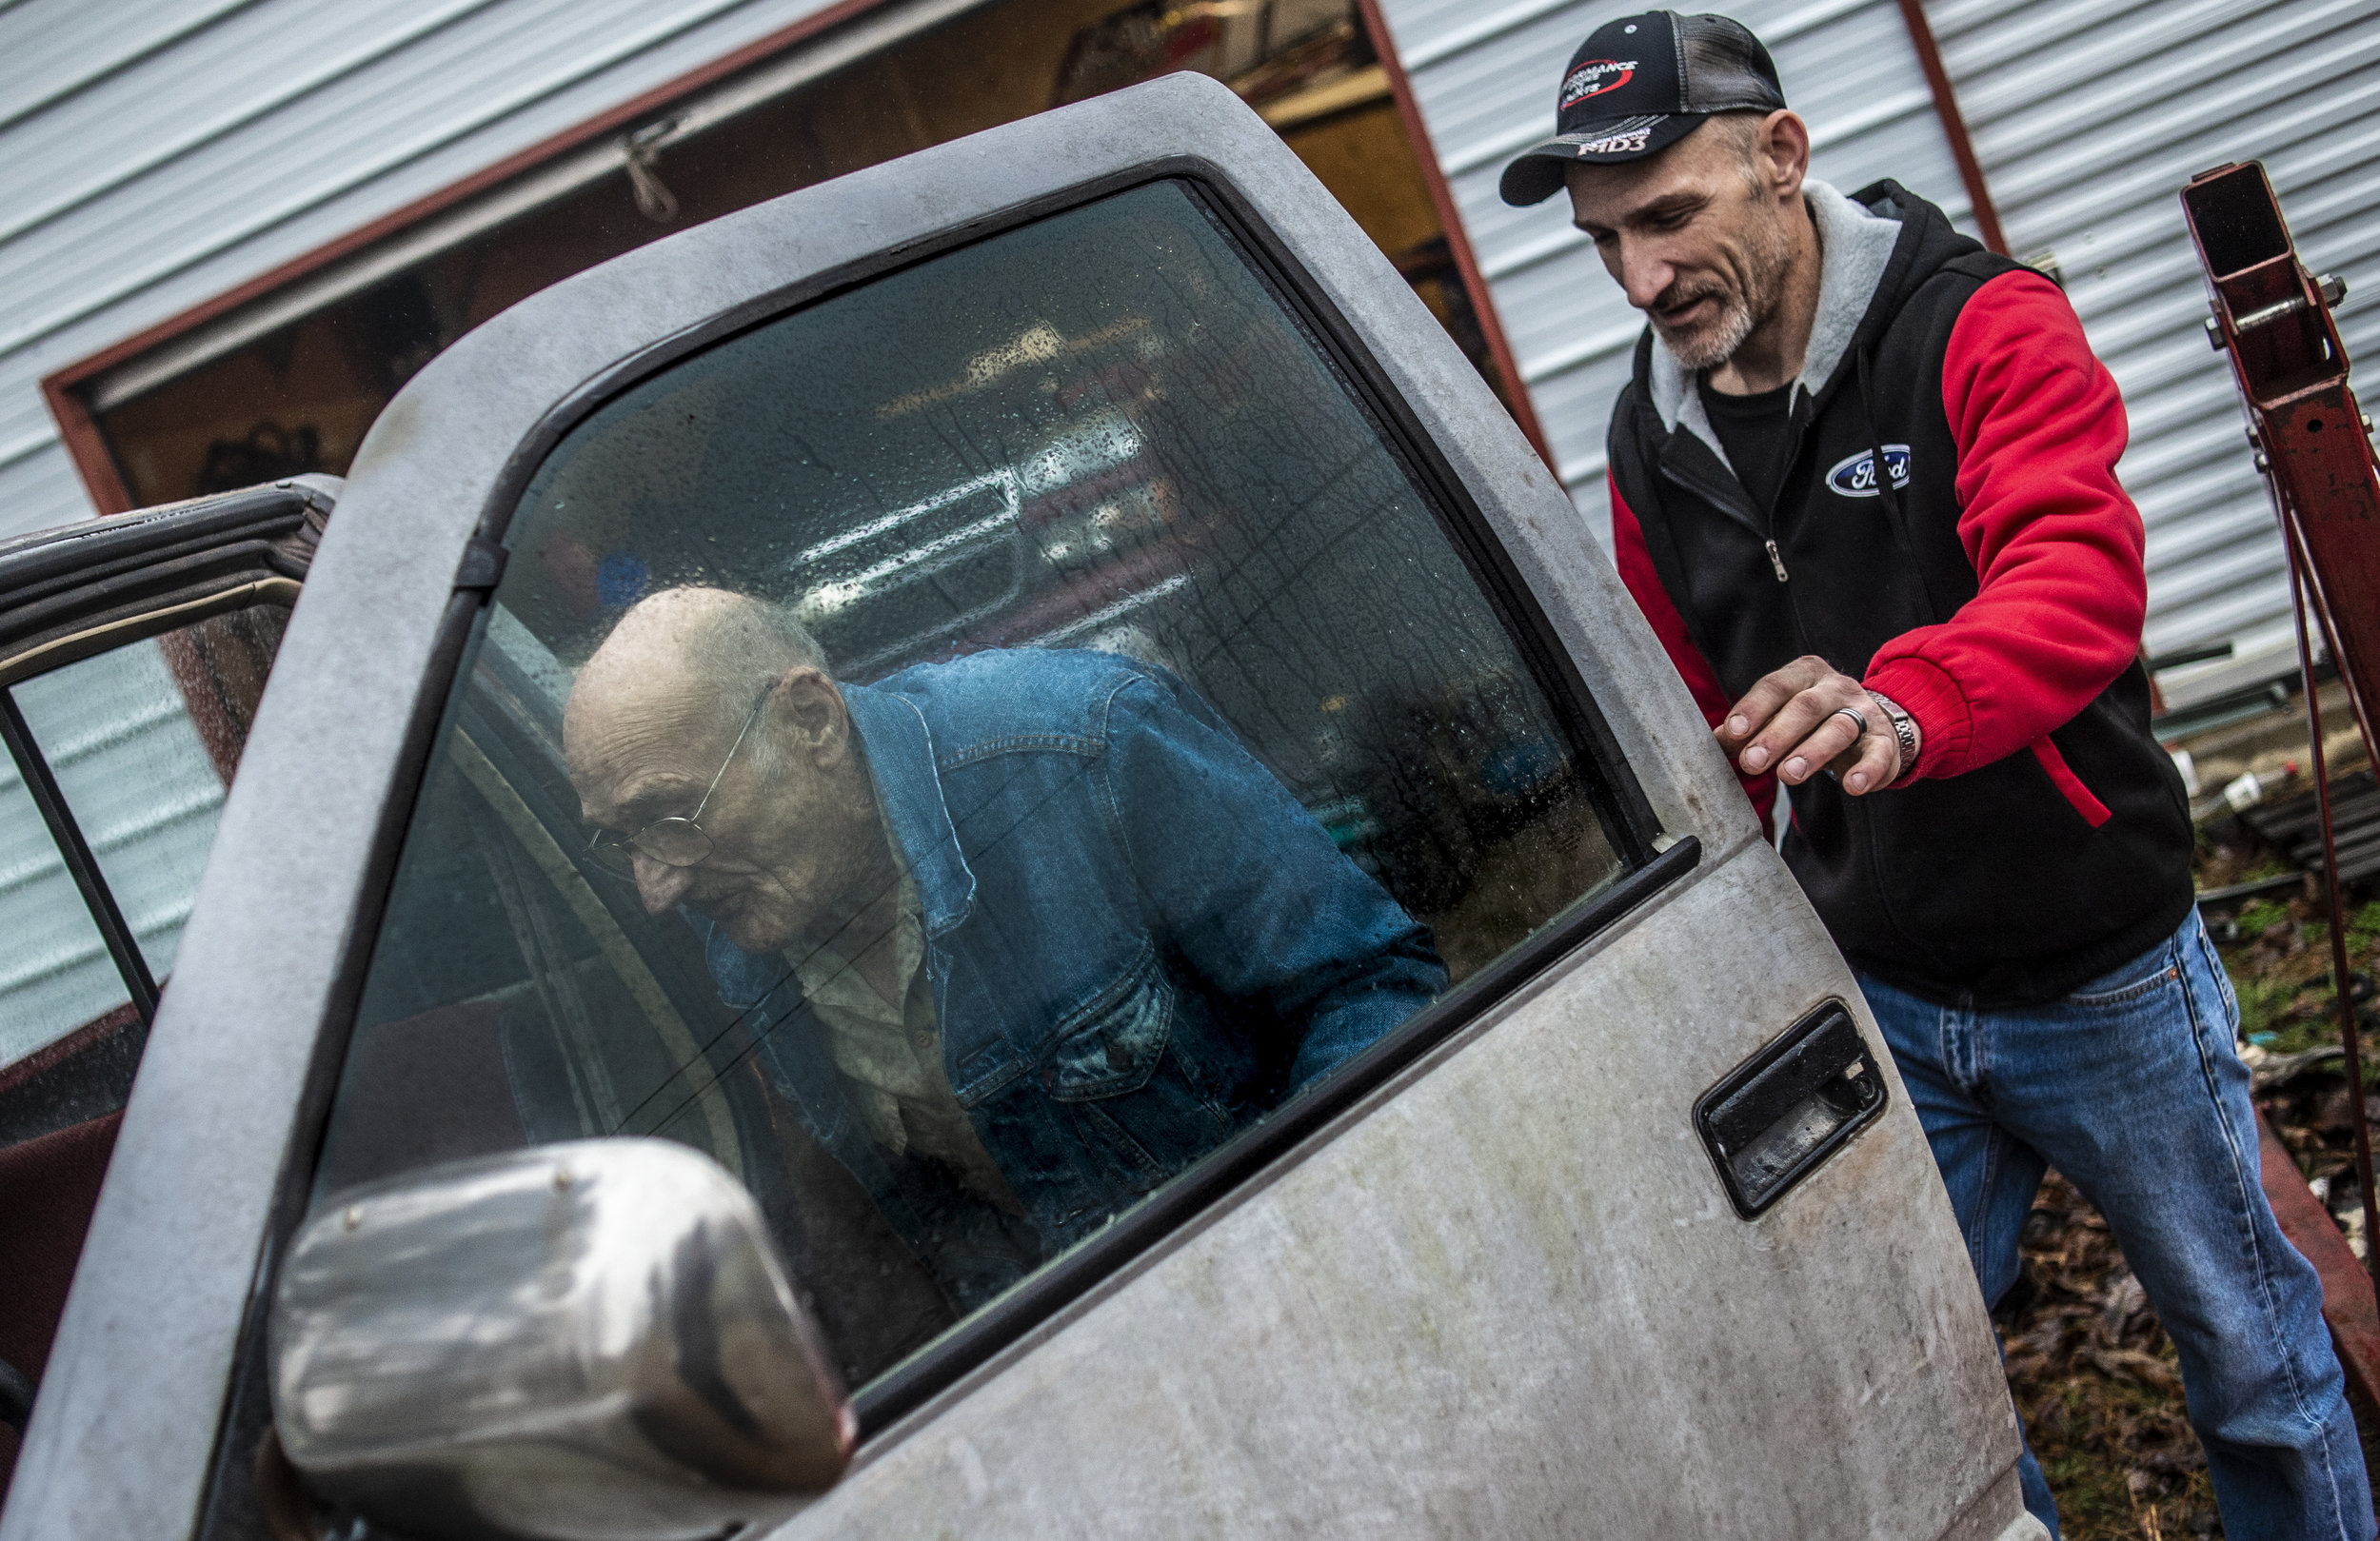  Jackie Yates helps his father Verne to his truck after Verne delivered a transmission for a truck that Jackie is working on to his house in Cedar Bluff, Virginia on Friday, January 18. Verne, who worked much of his life in the coal mines, has stage 